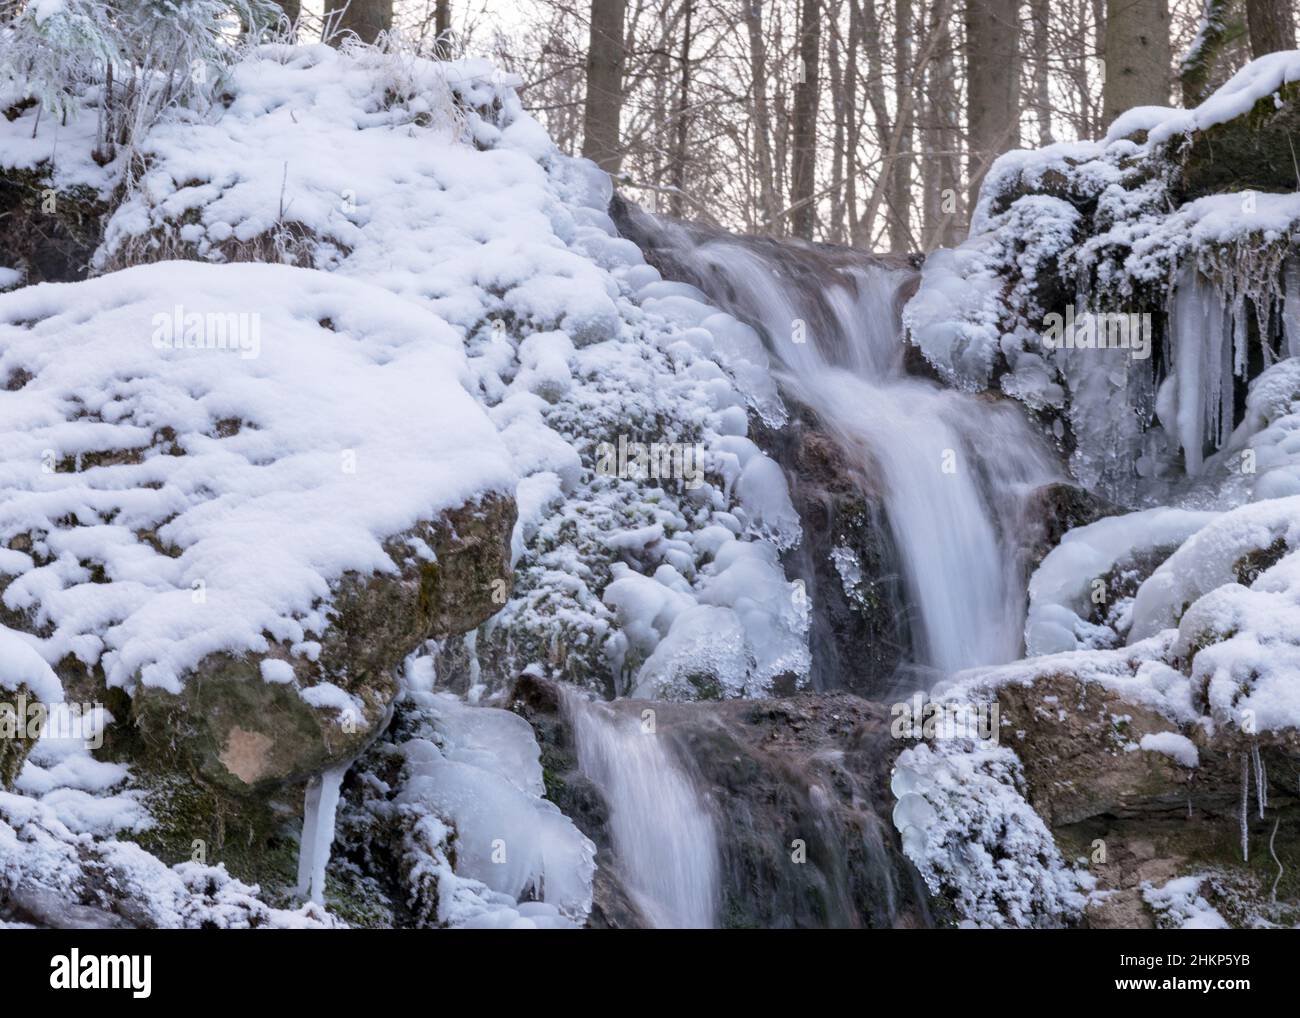 photography with contrasts of frozen and running water, spring water flows over pieces of limestone, running water freezes to form various beautiful s Stock Photo